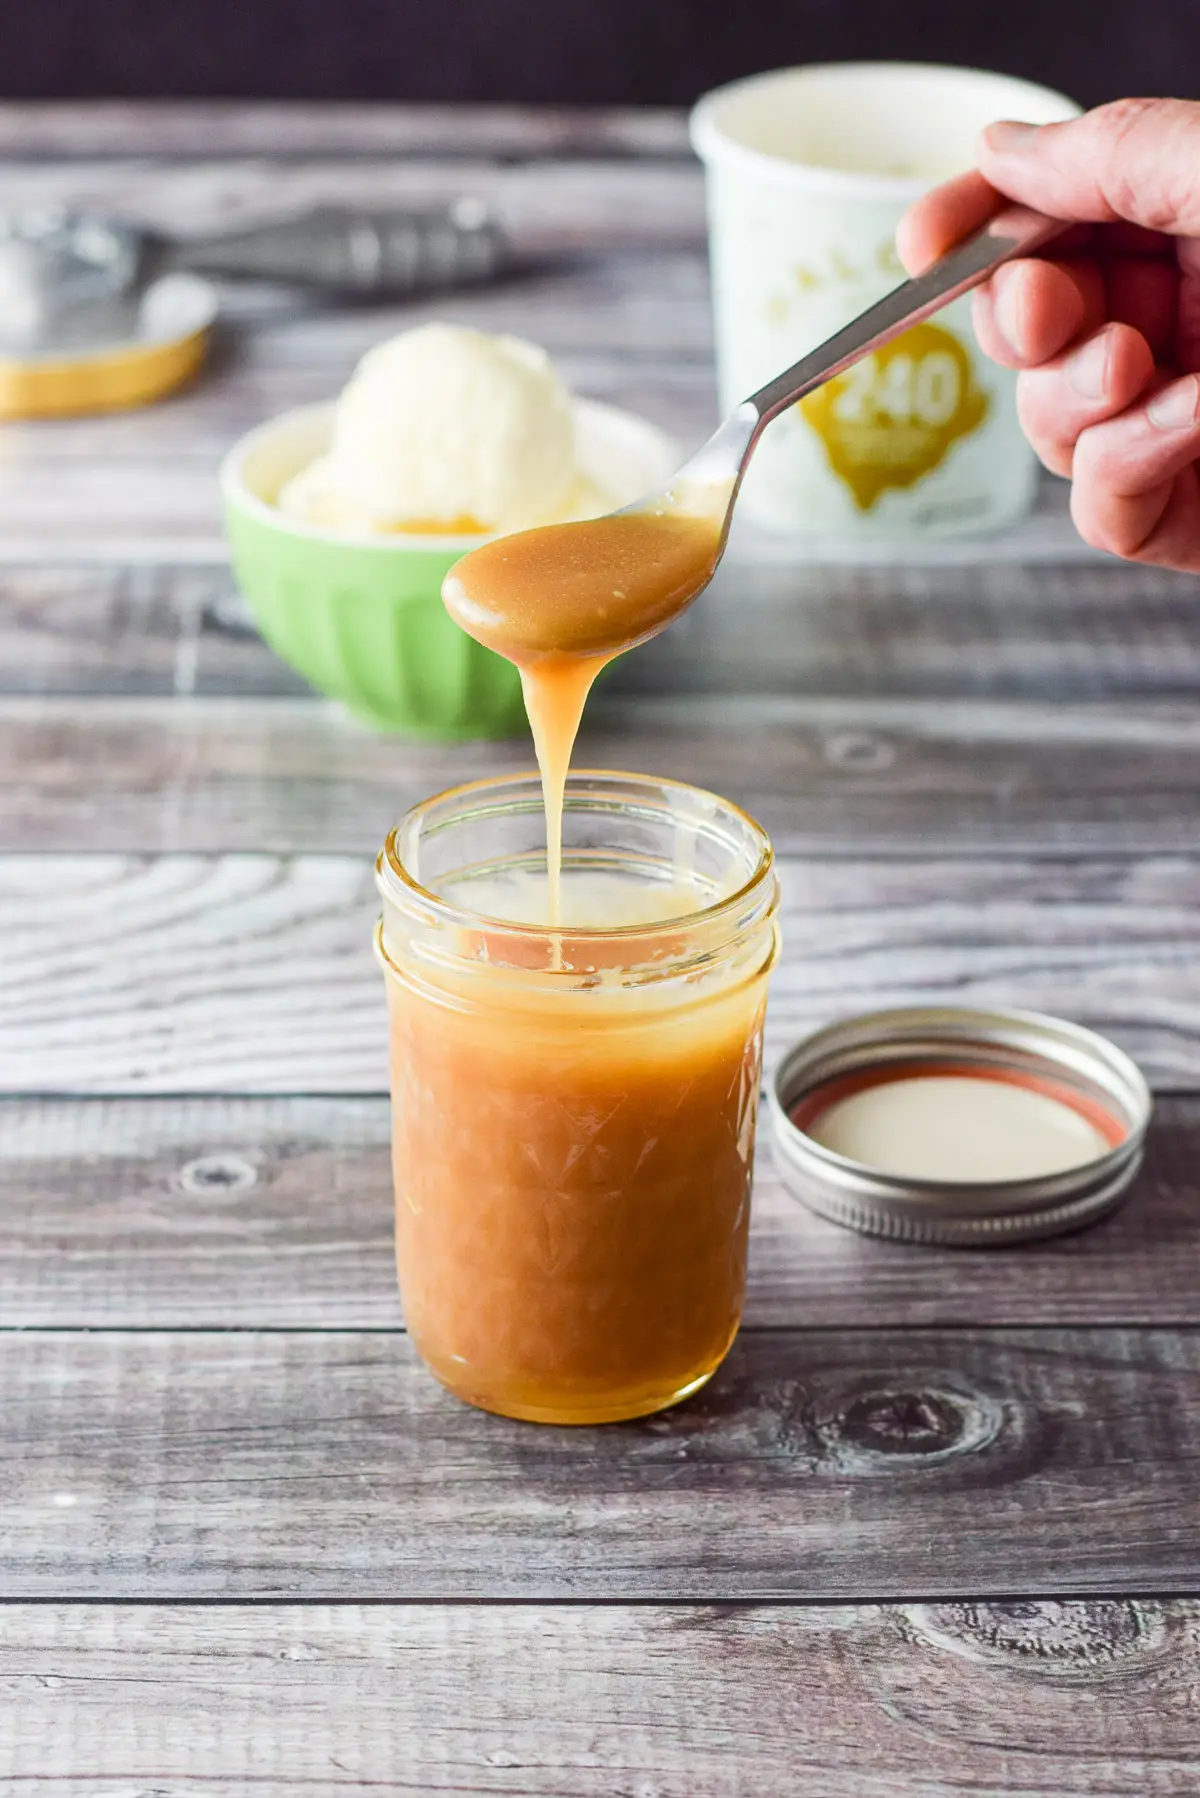 Spoonful of the caramel sauce held over the jar with ice cream in the background